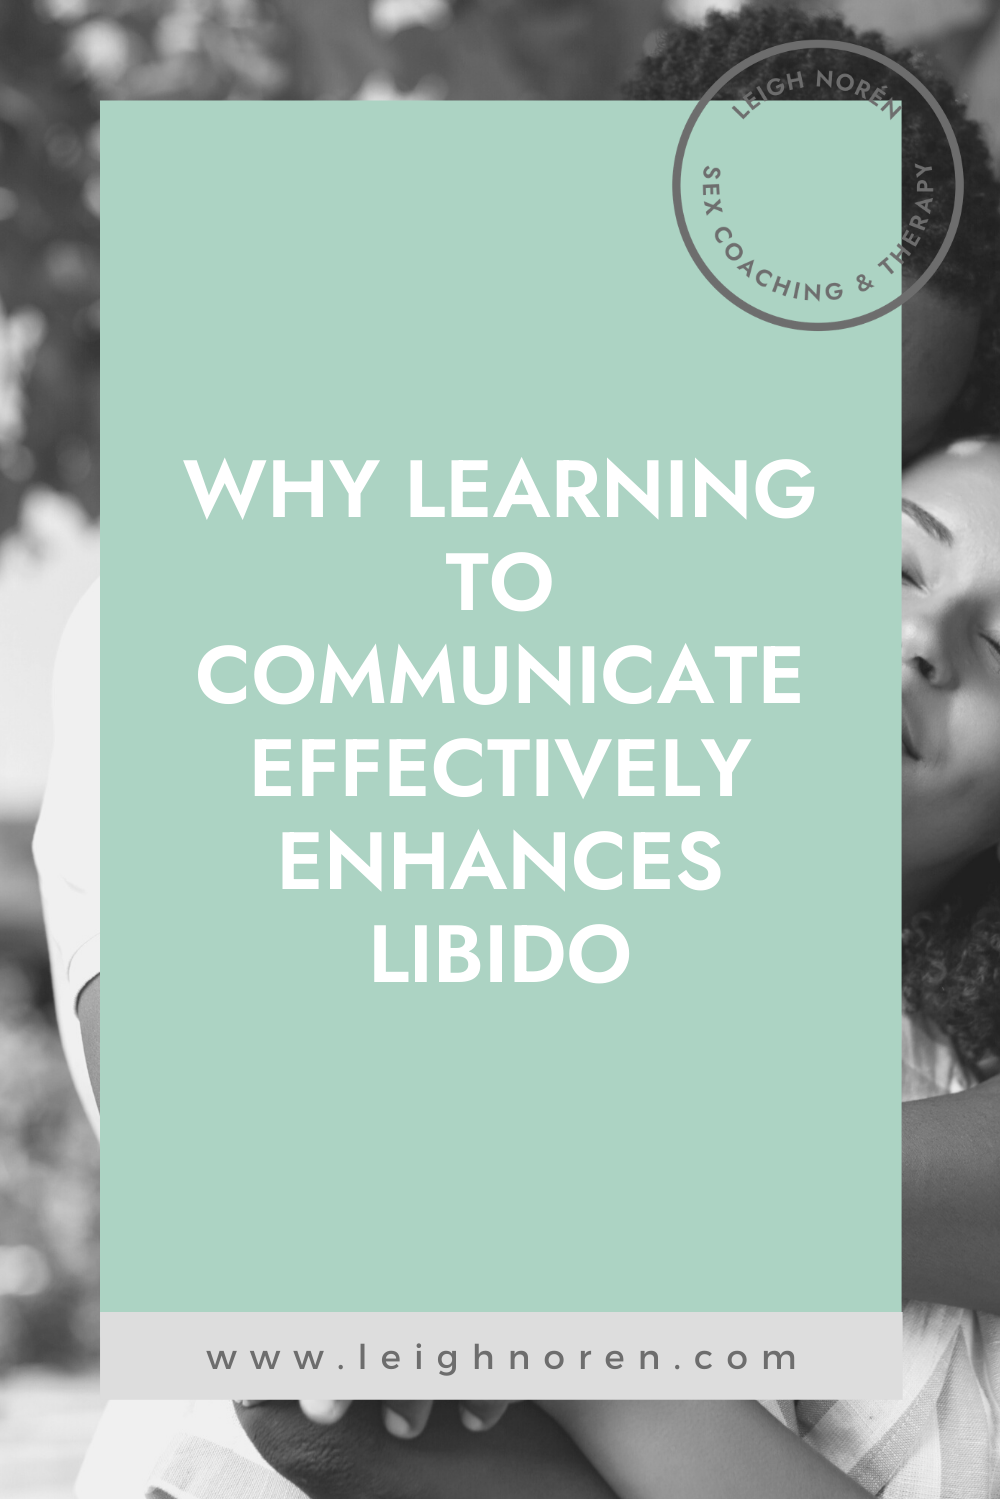 Why Learning to Communicate Effectively Enhances Libido